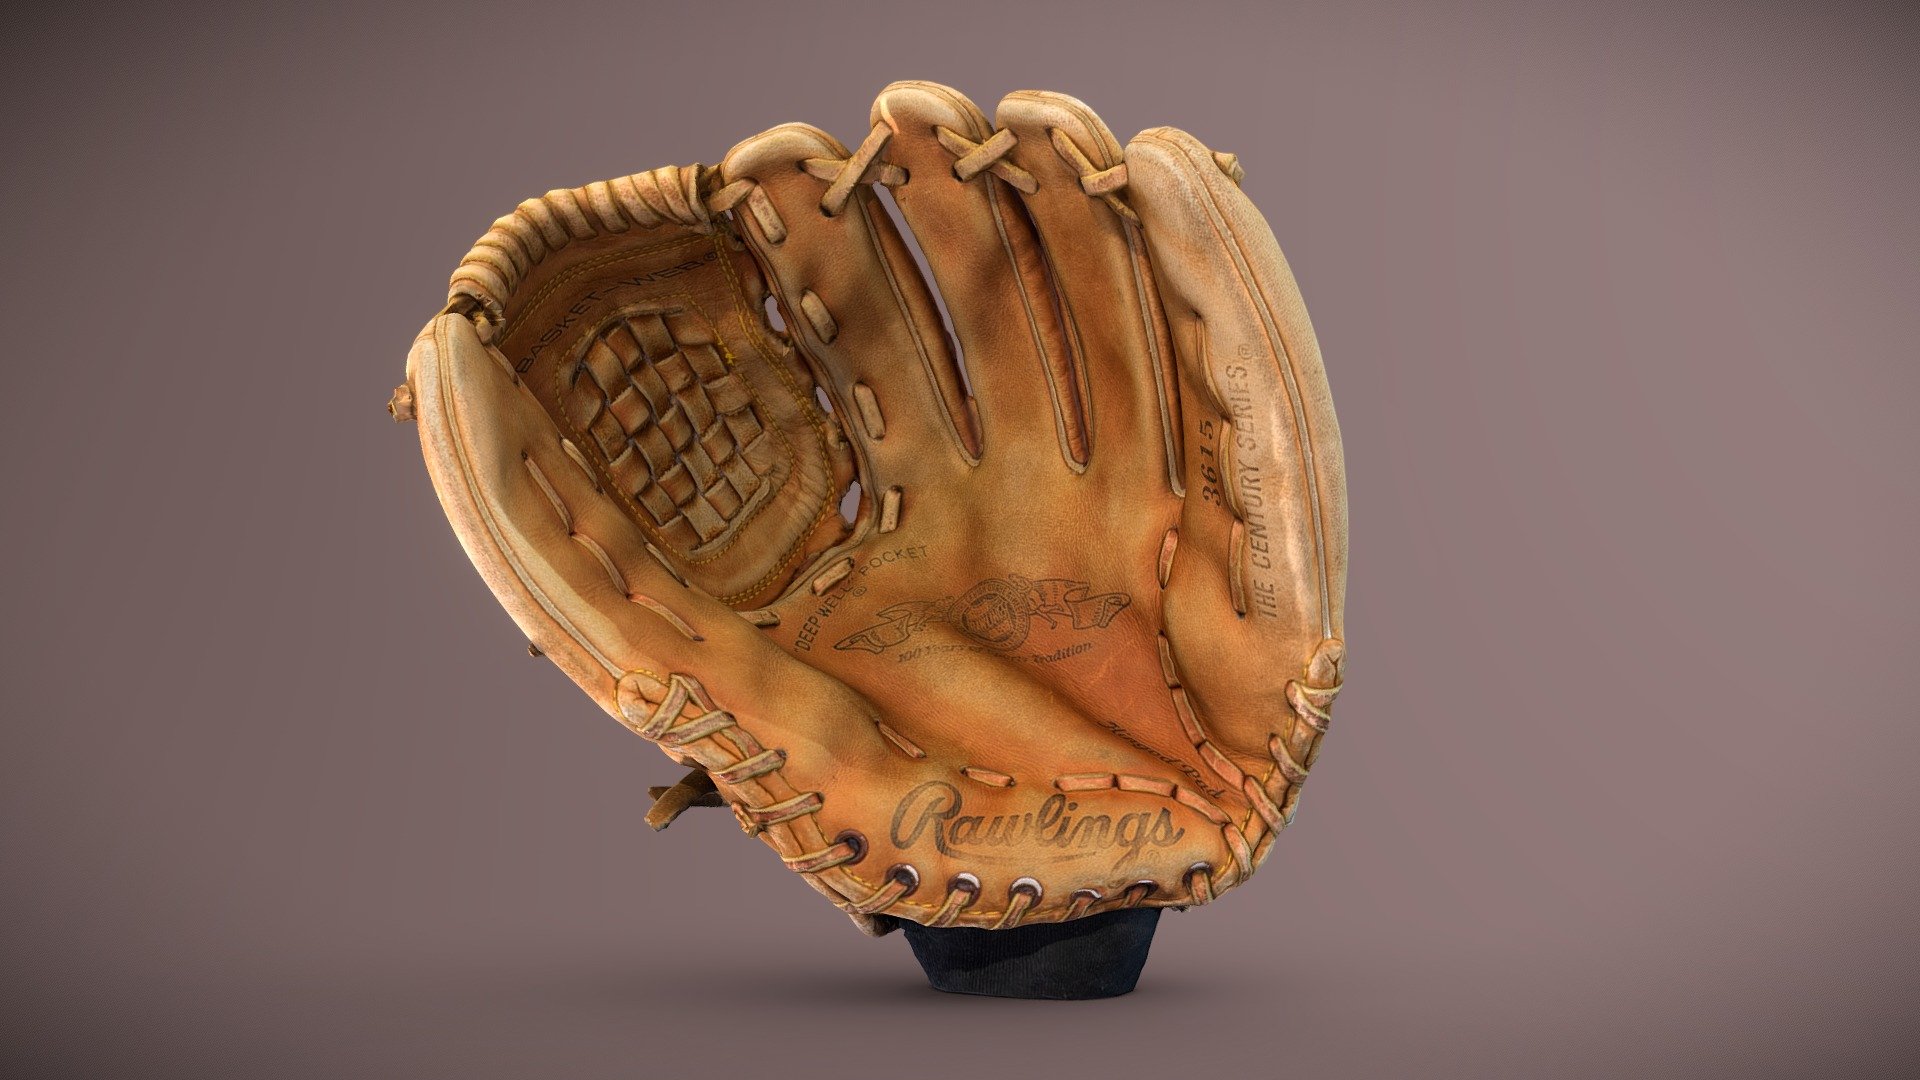 Old baseball glove, 3D scanned with a turntable, lots of lights, and a single A7R (457 photos)

Cleanup and retopology to quads in ZBrush. PBR workflow in Photoshop to create specularity and roughness maps.

High polygon (5.2 million poly) version of model and textures is included

Full textures are 8K x 8K and low poly textures are at 2K x 2K - Vintage Rawlings Century Series Glove - Buy Royalty Free 3D model by omegadarling 3d model